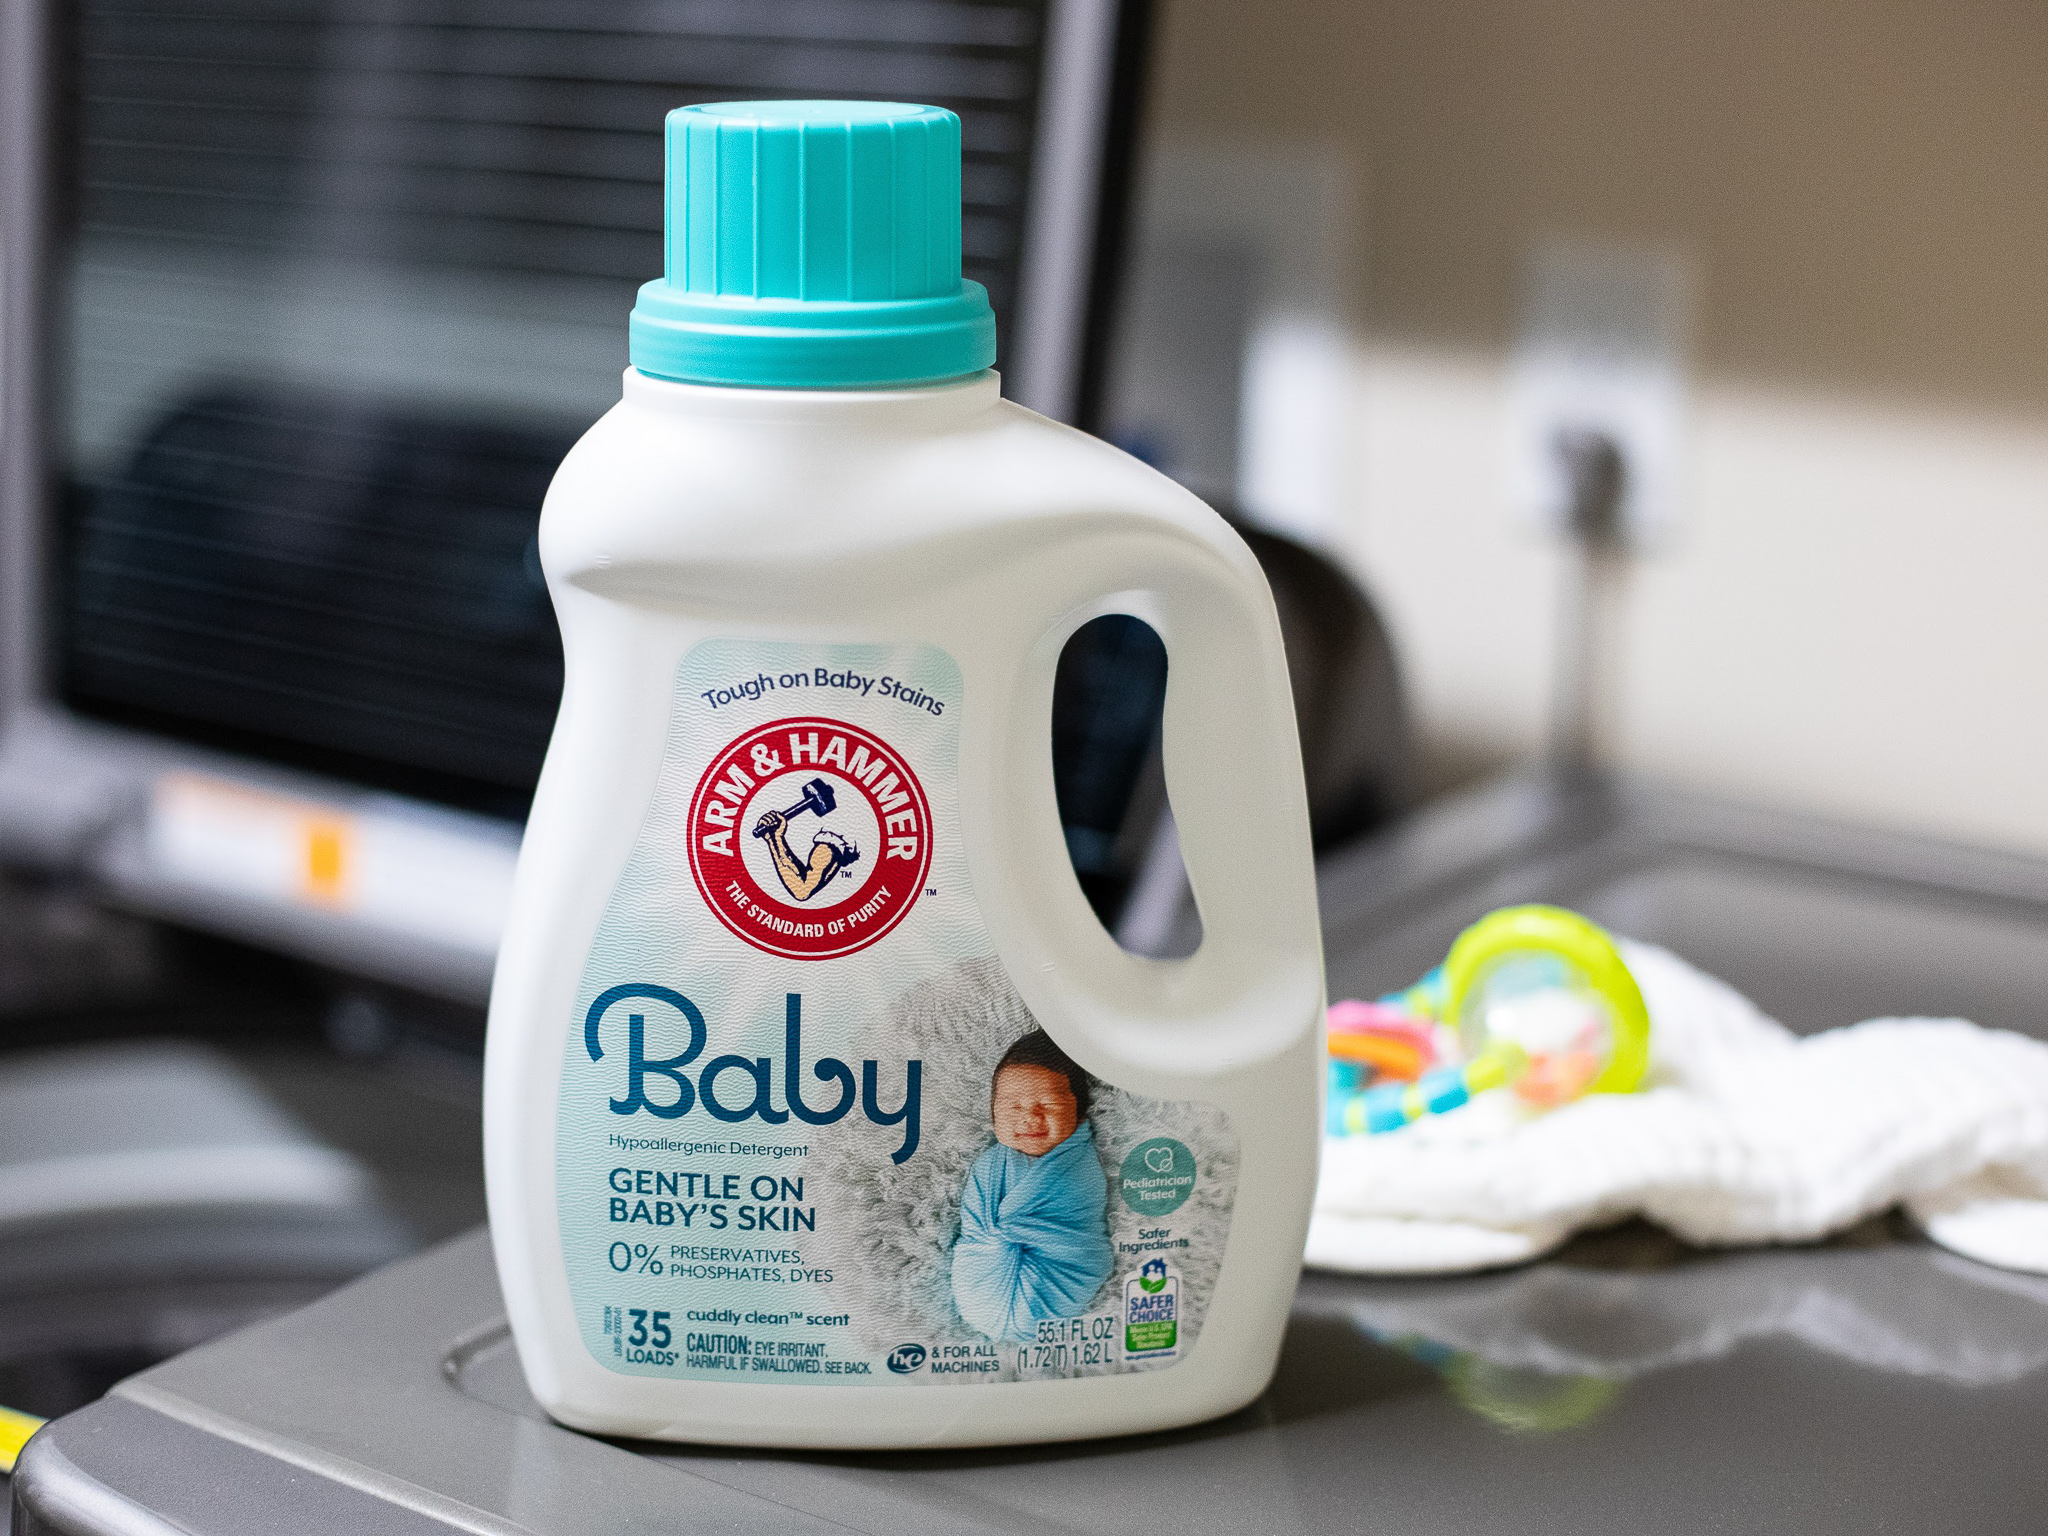 Grab Arm & Hammer Baby Detergent As Low As $1.09 At Publix